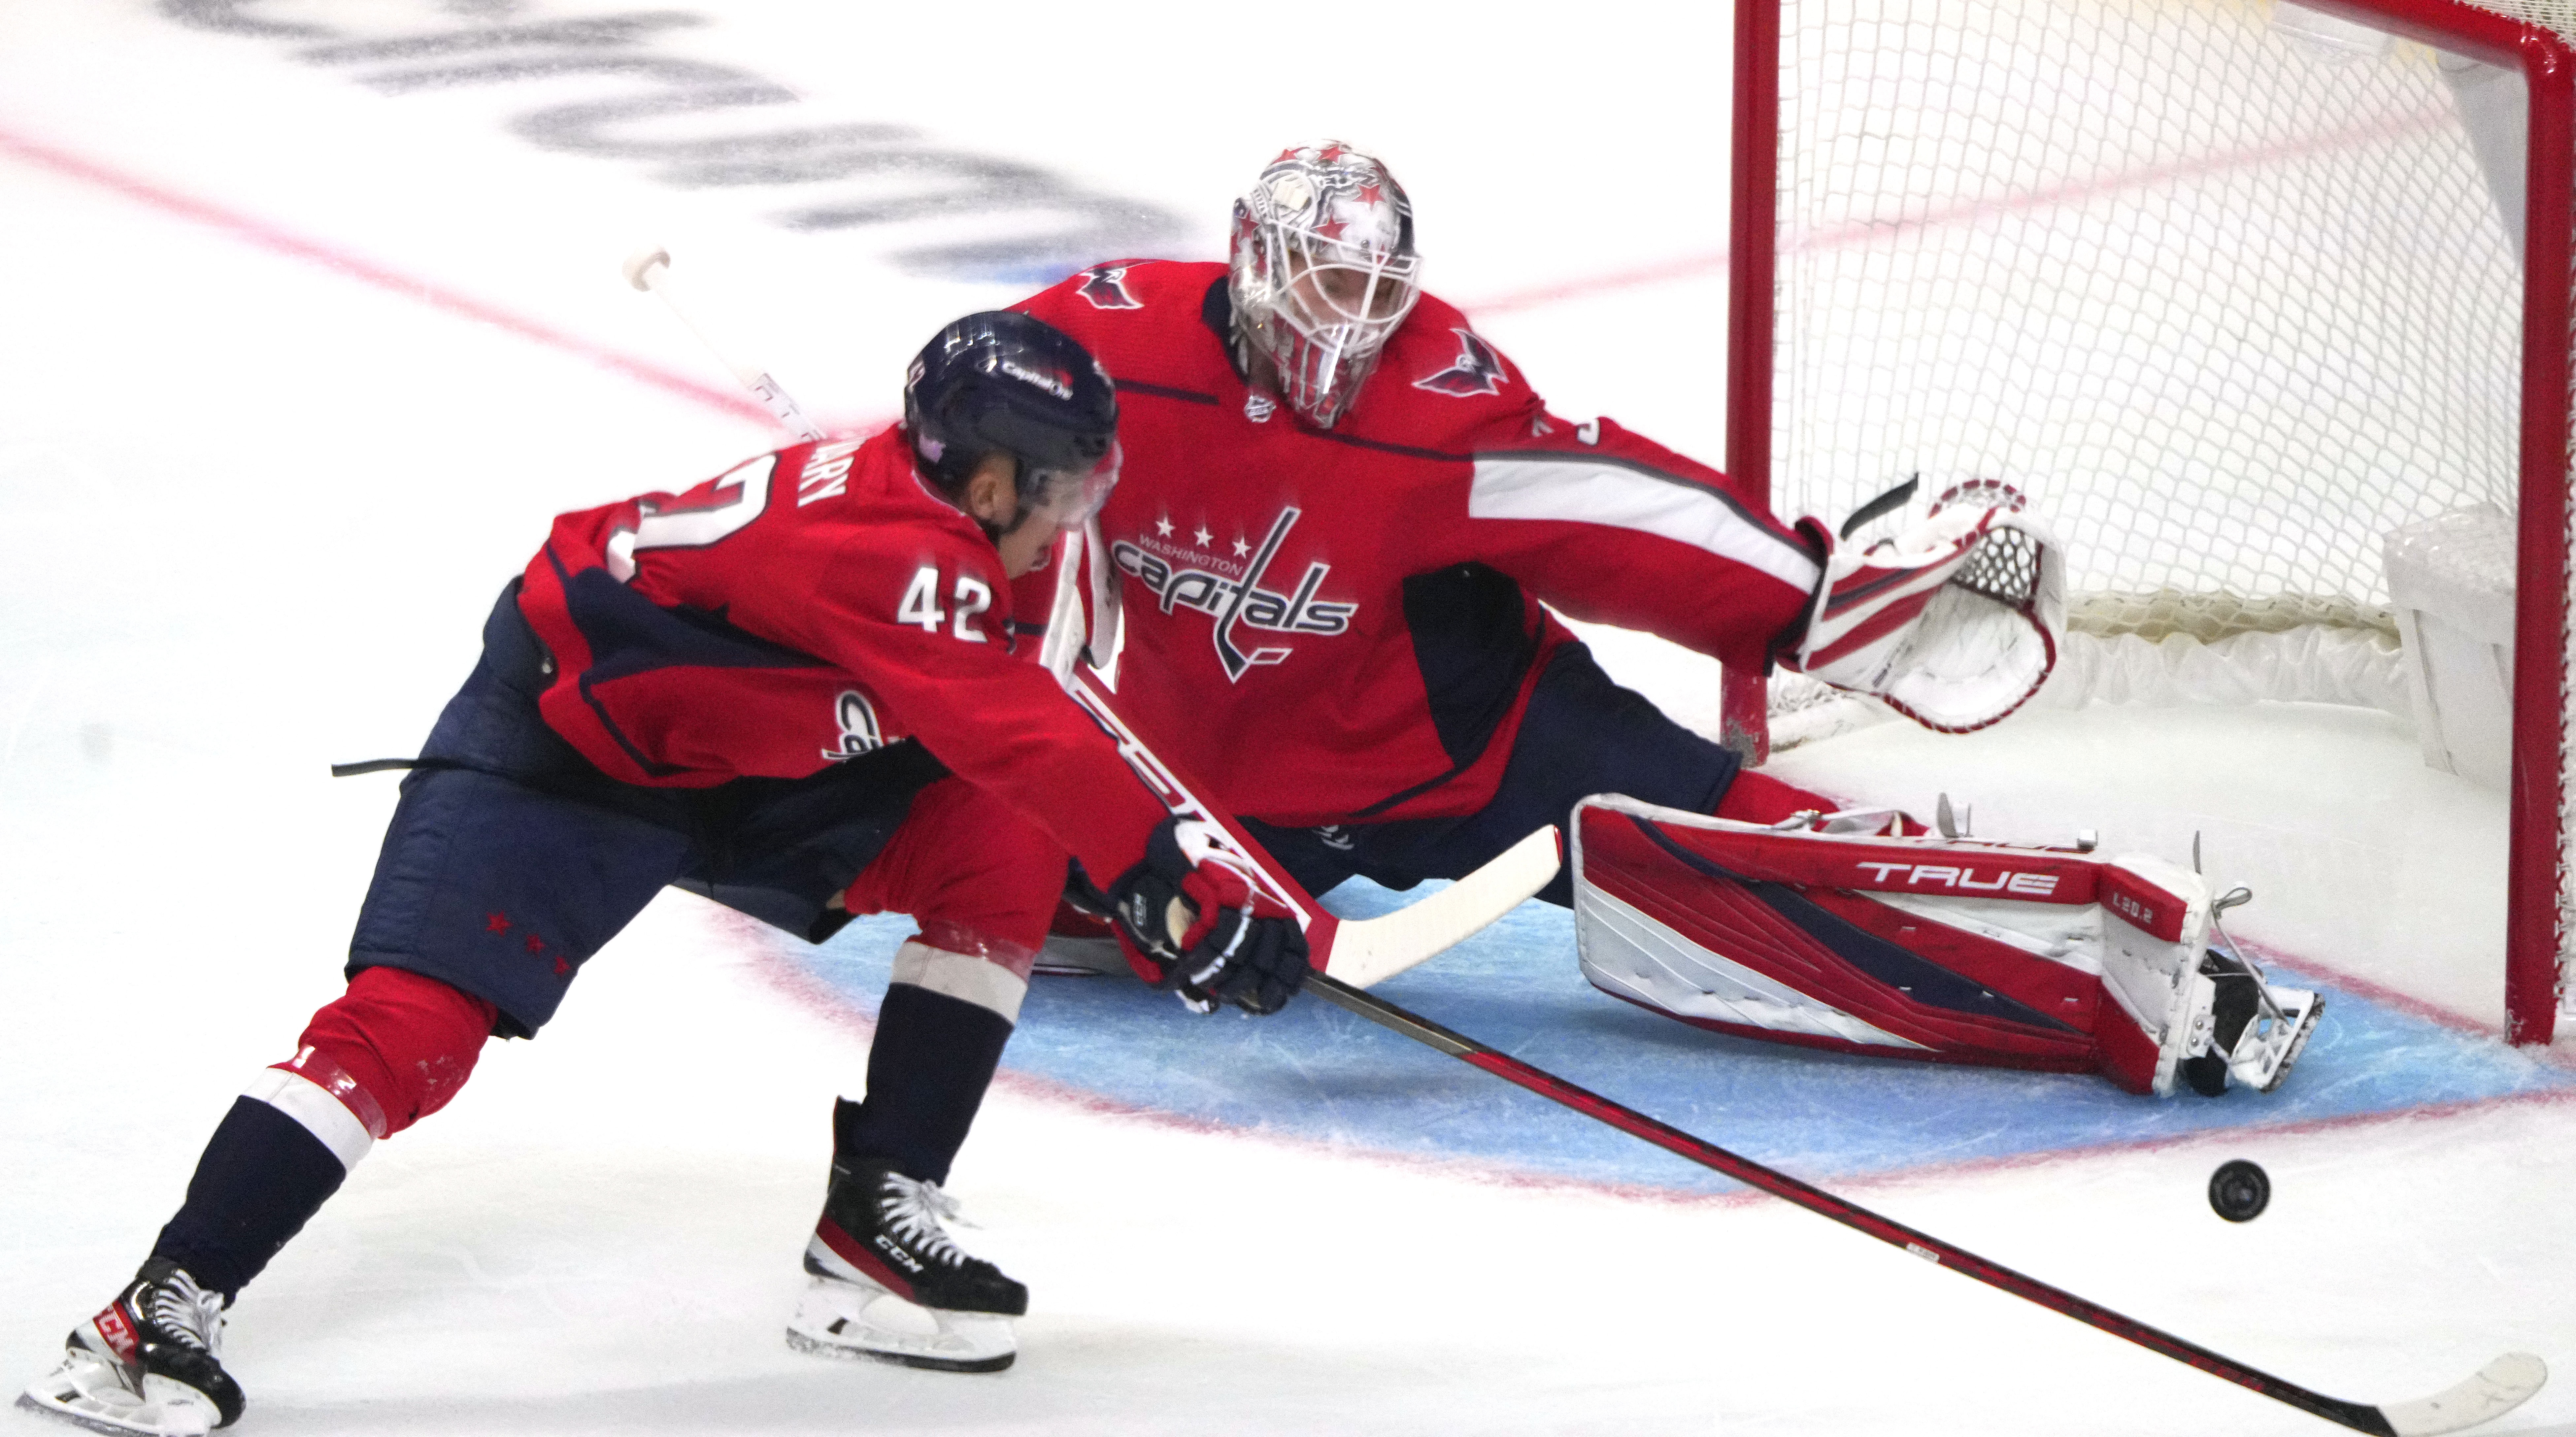 Washington Capitals defeated the Los Angeles Kings 2-0 during a NHL hockey game at Staples Center in Los Angeles.